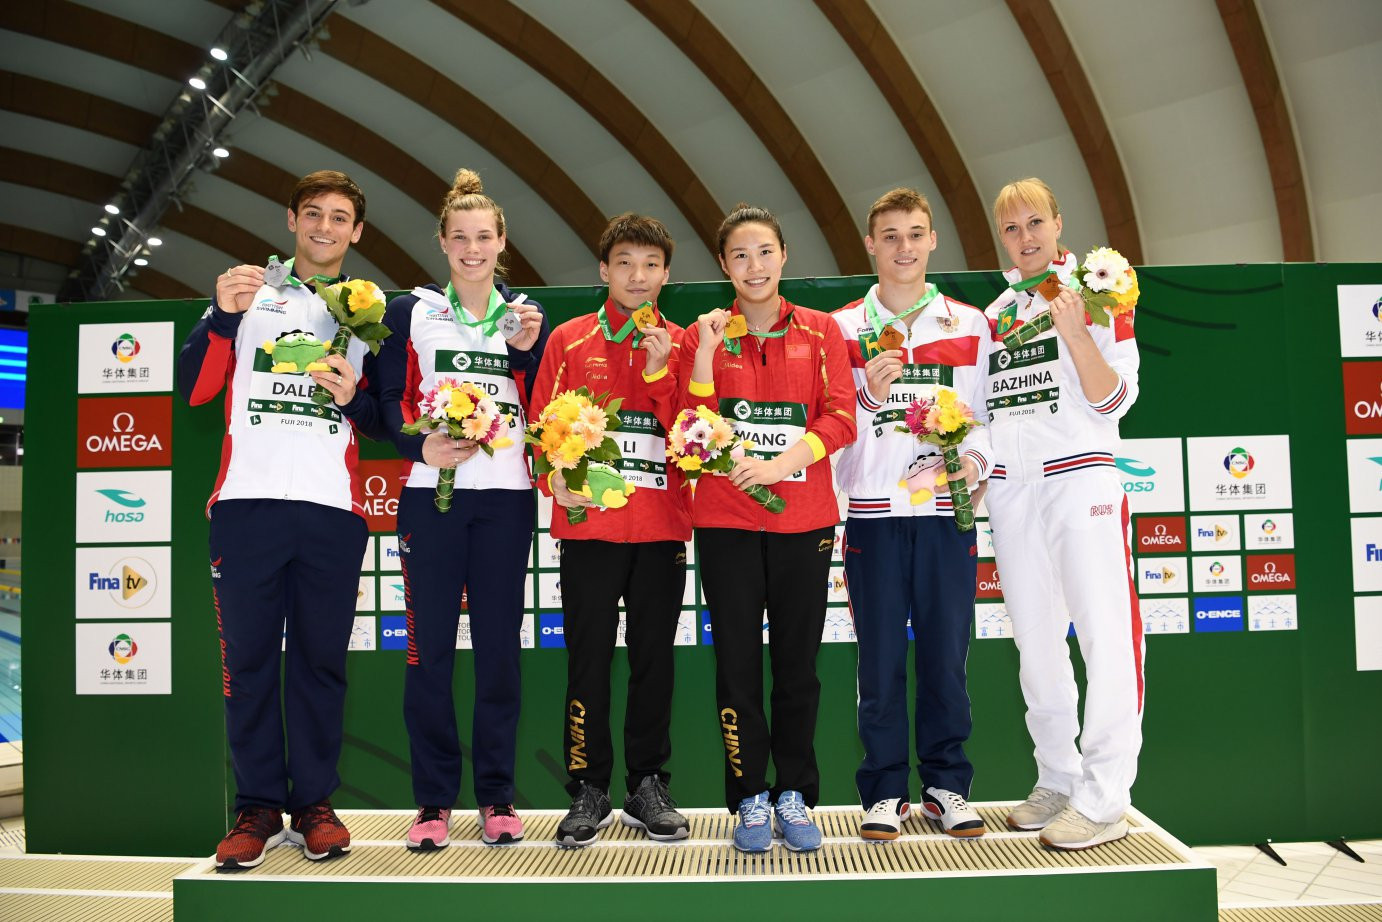 The medallists line up from the final event in the FINA Diving World Series at Fuji - the mixed 3m springboard ©FINA